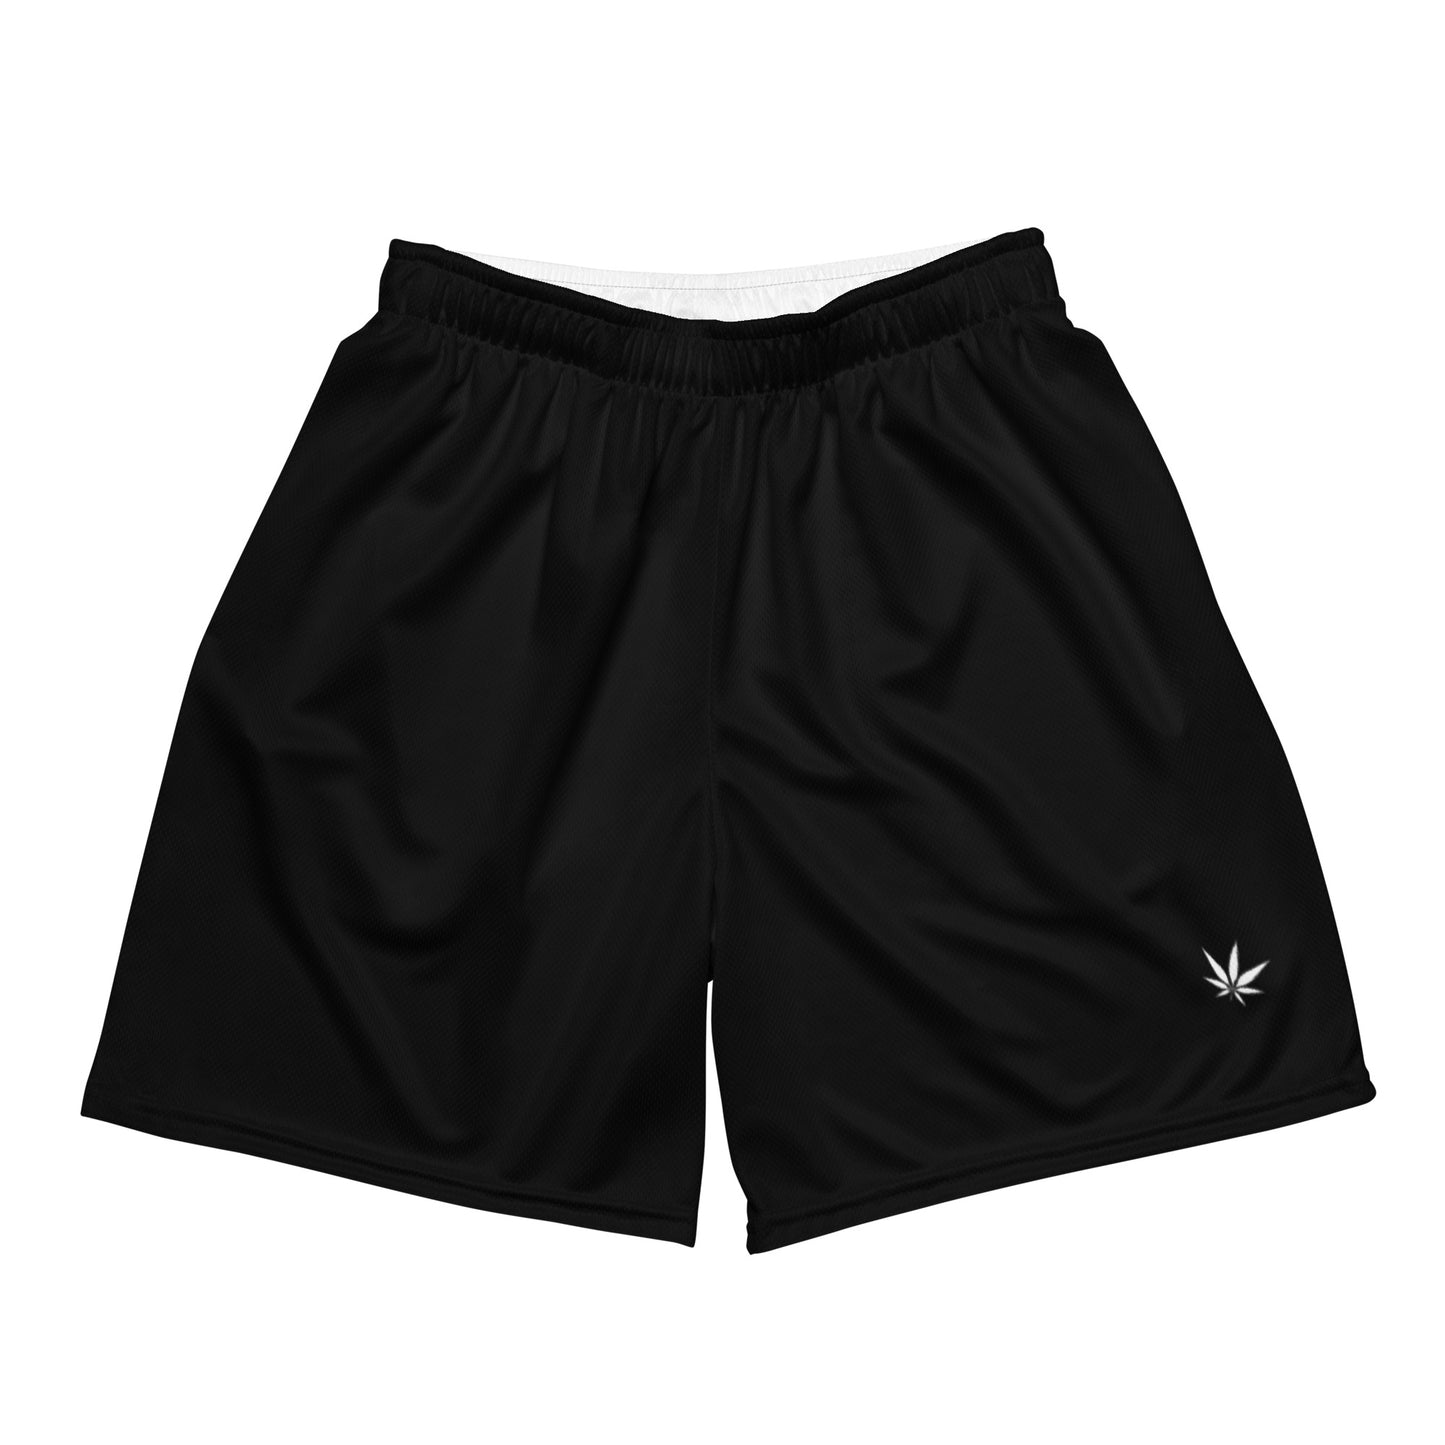 All Black Unisex Mesh Shorts With White Weed Leaf